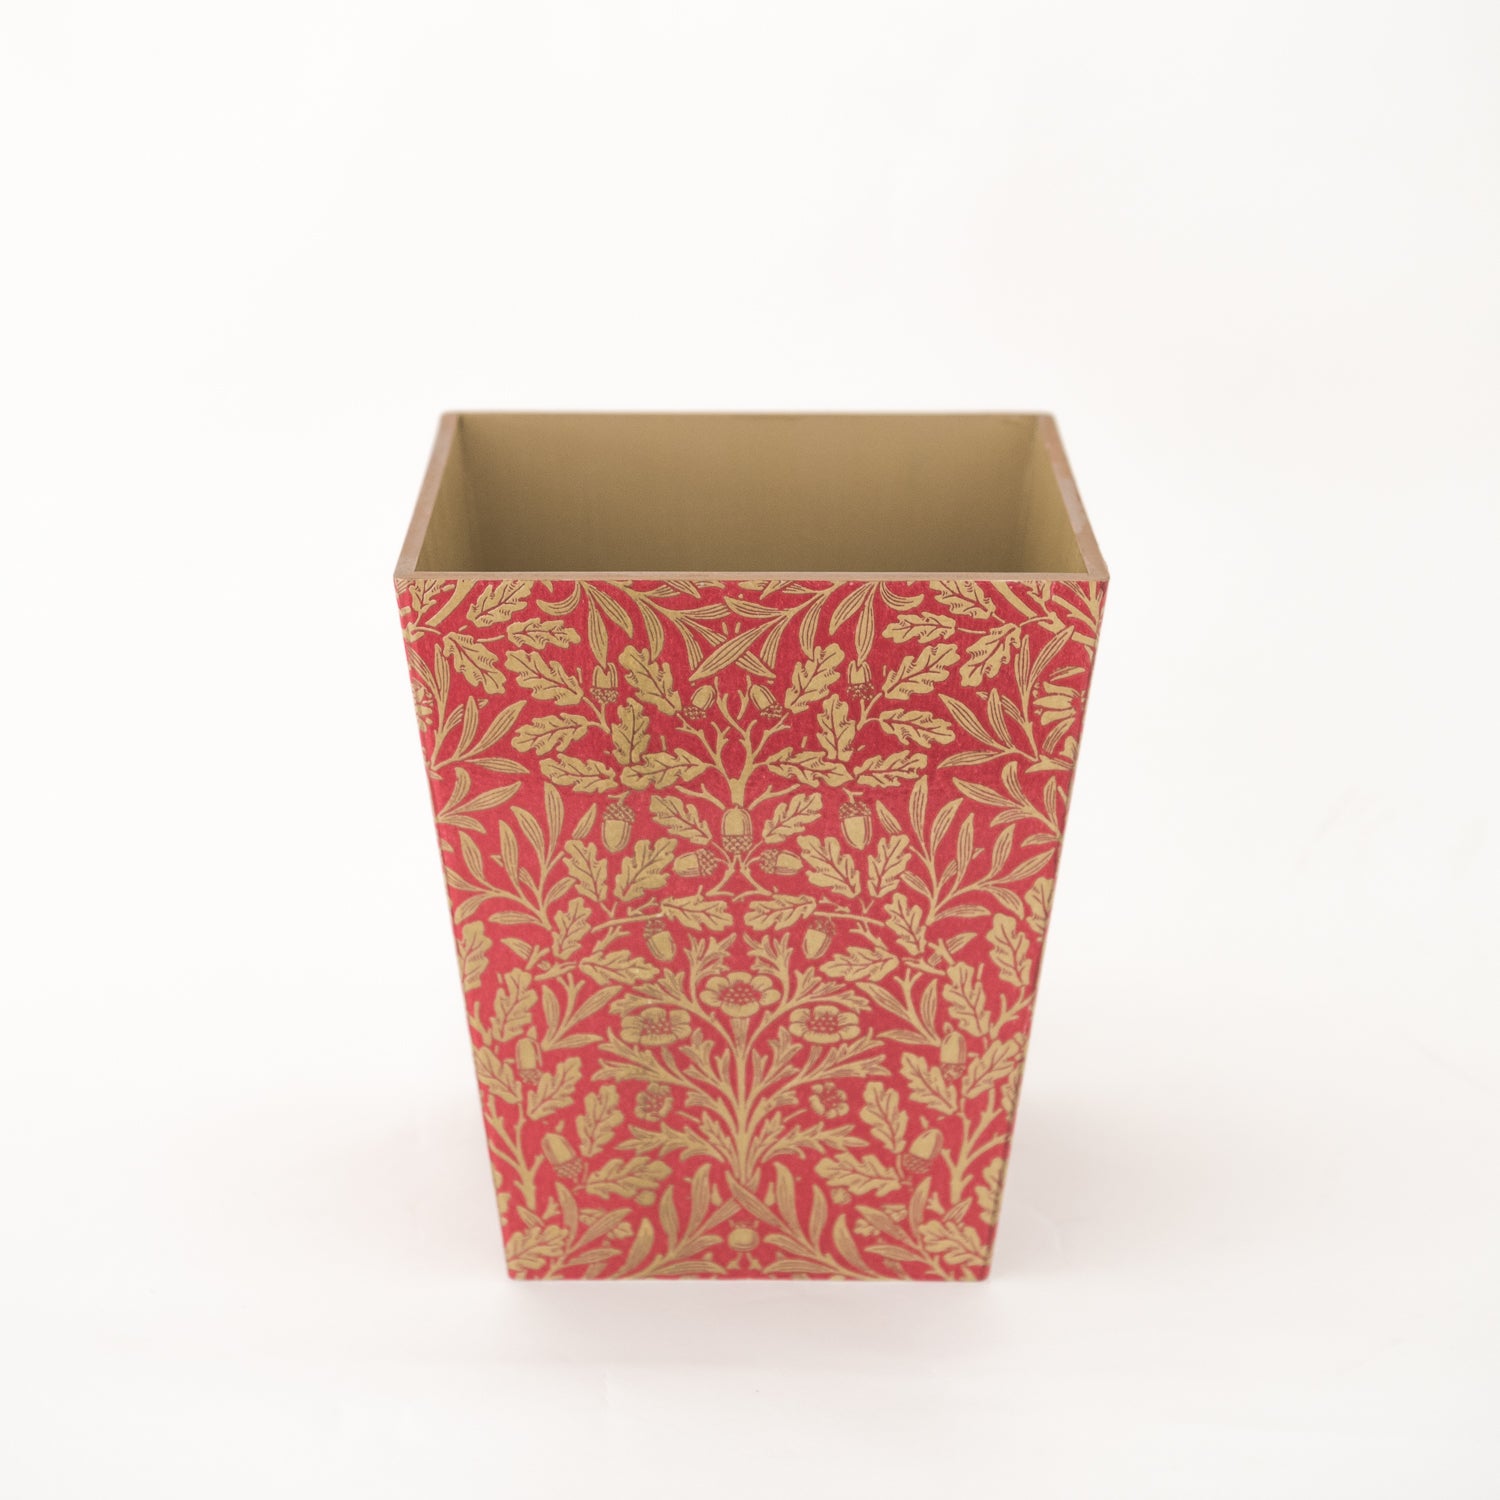 Tissue Box Cover wooden Red & Gold Acorn